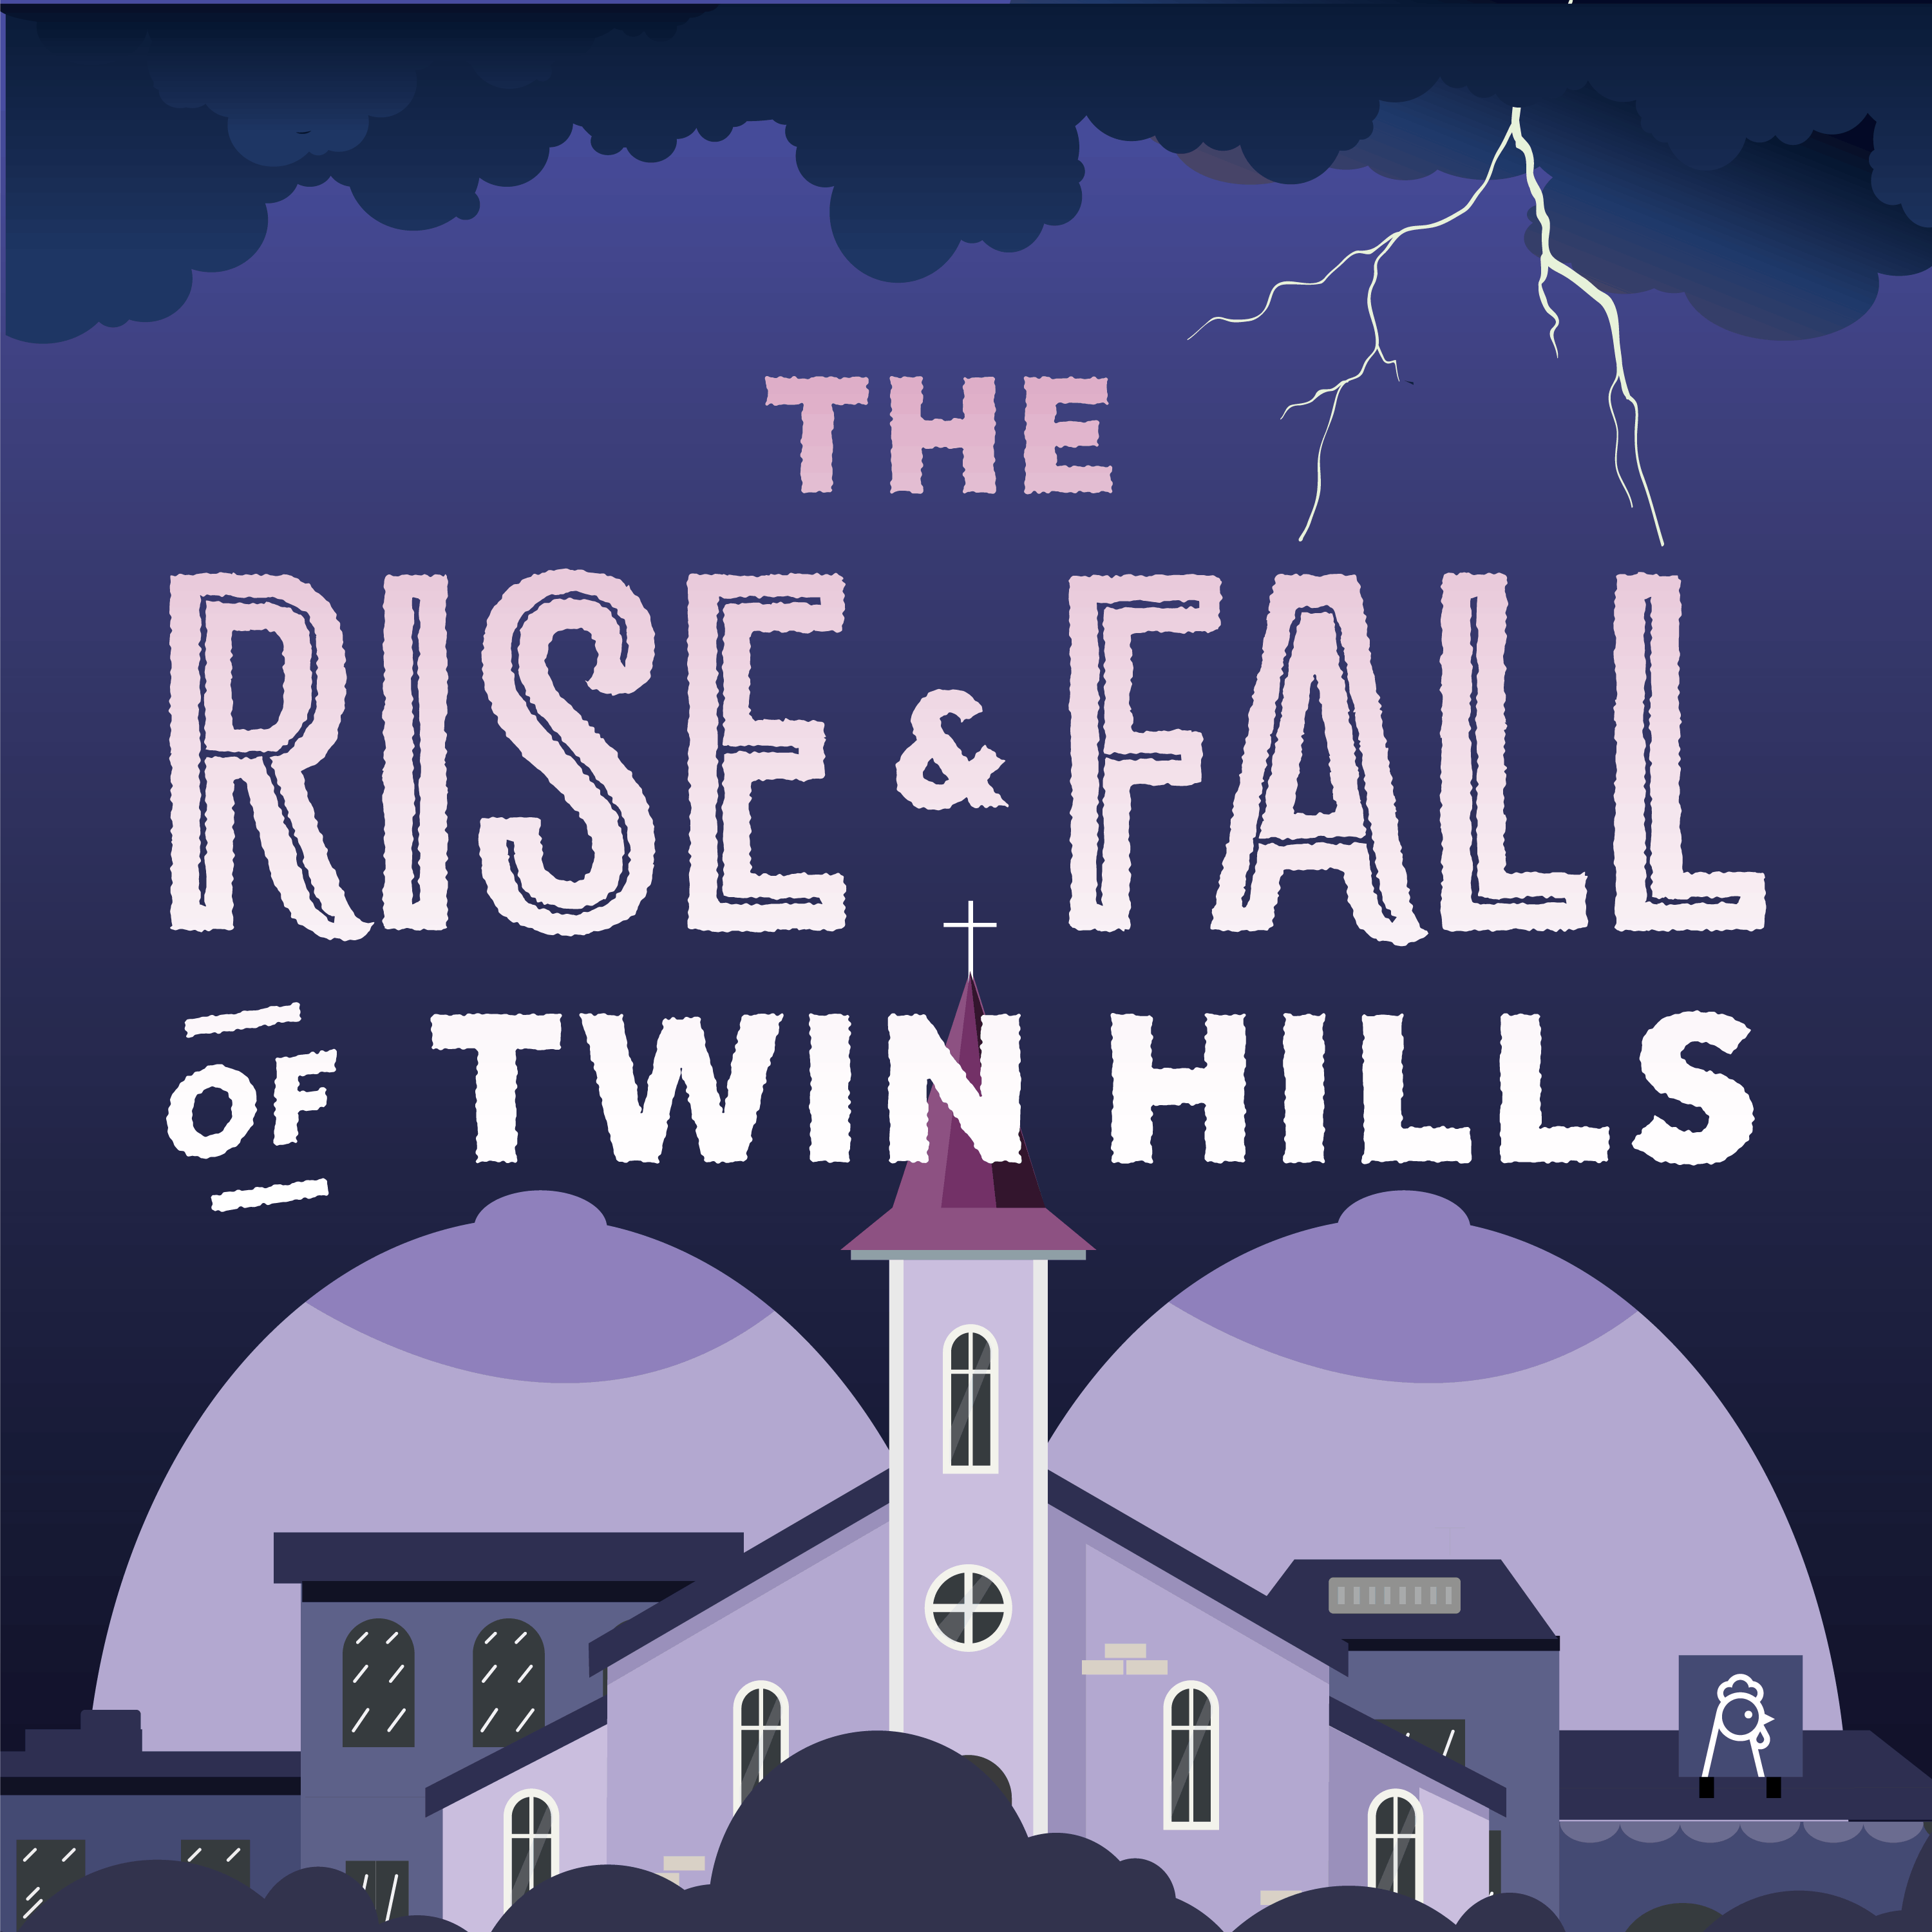 Part 5: The Rise & Fall of Twin Hills ”Stick”